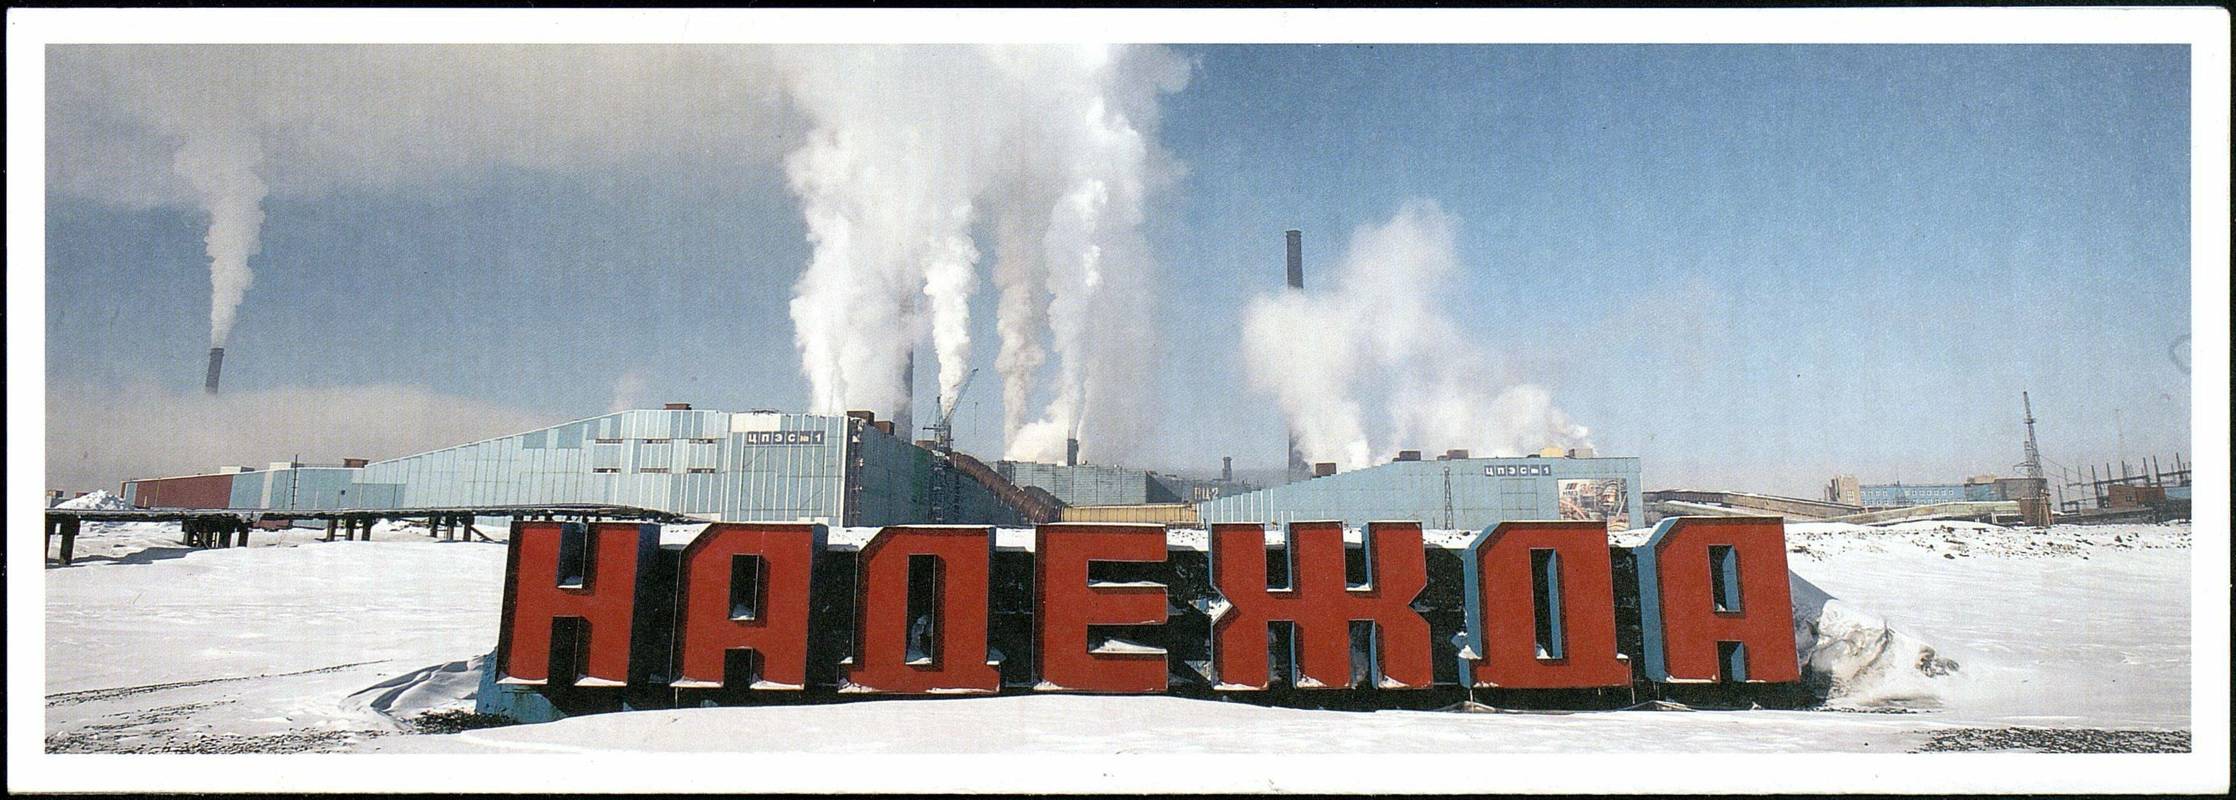 Надежда/Nadezhda — The Hope Principle. Artistic Perspectives on Russian Industrial Cities